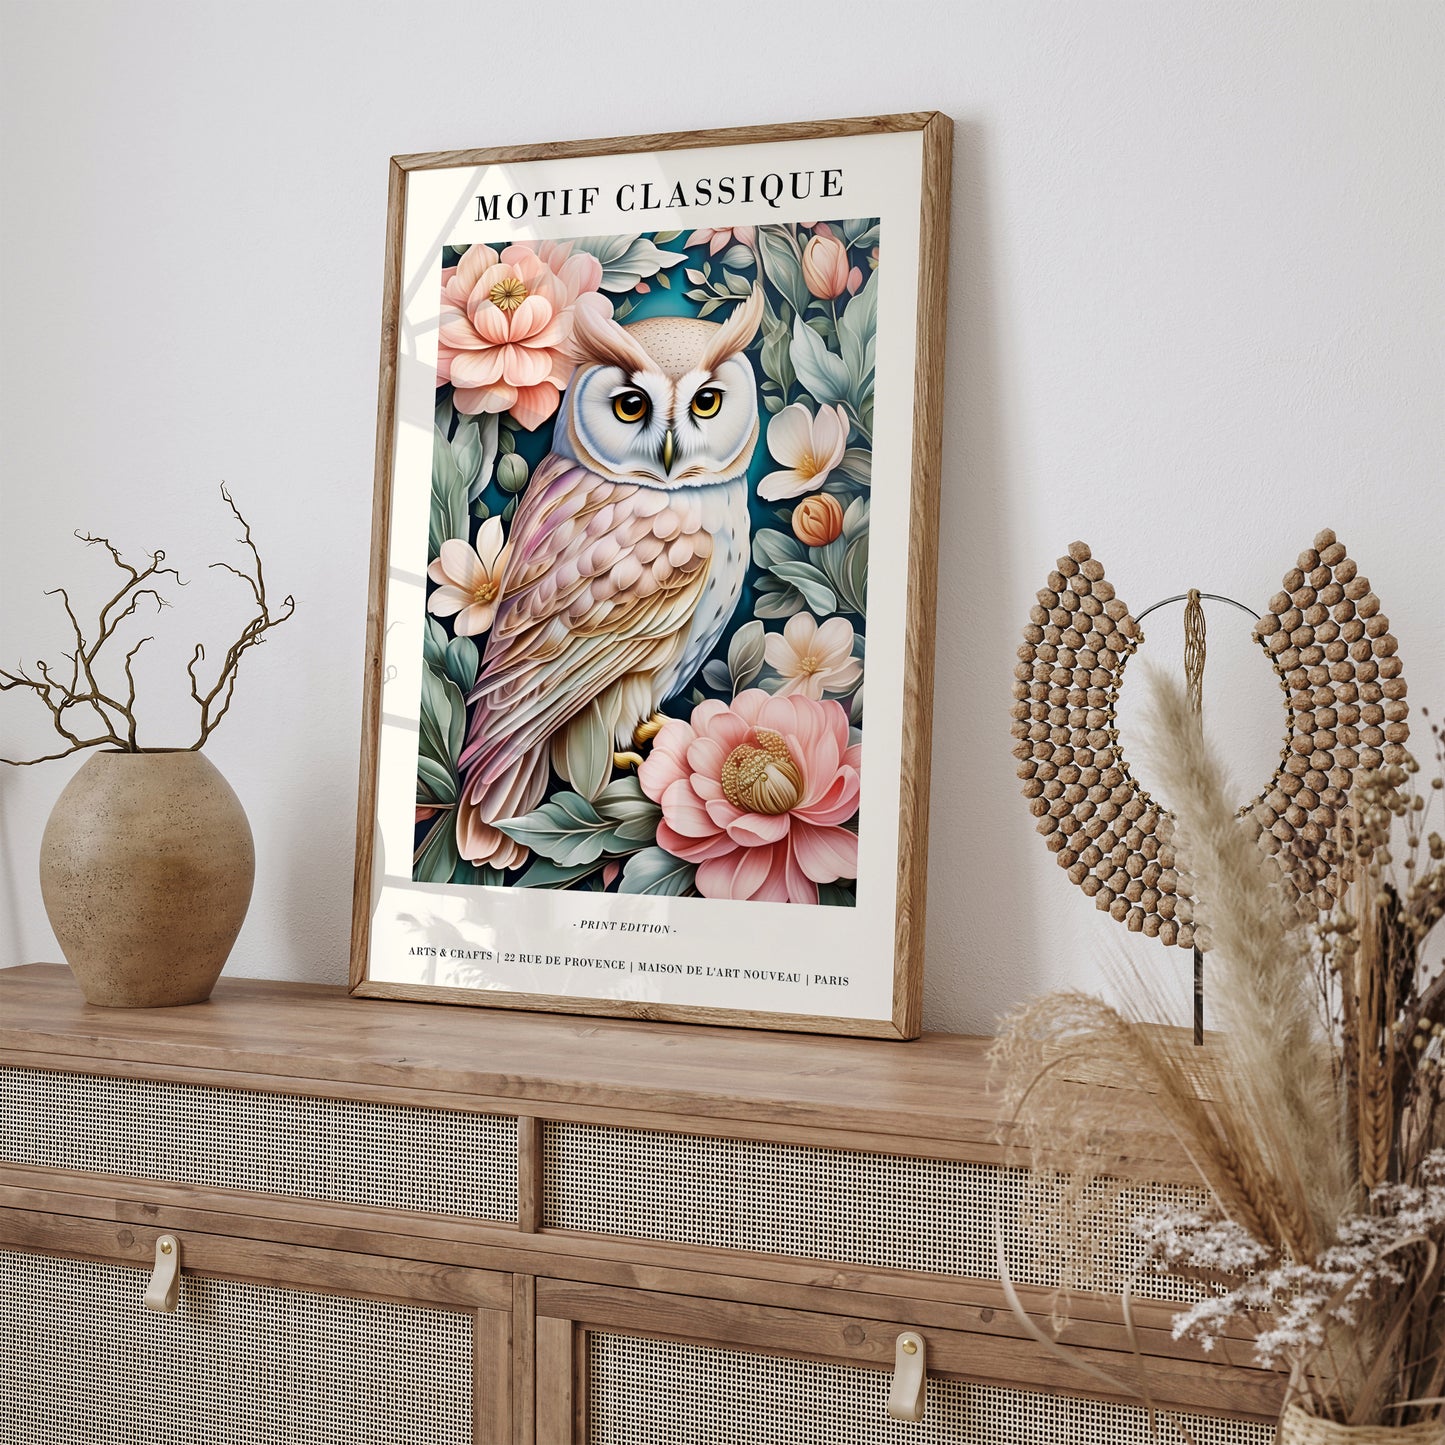 Classic French Motif Owl & Floral Art Print